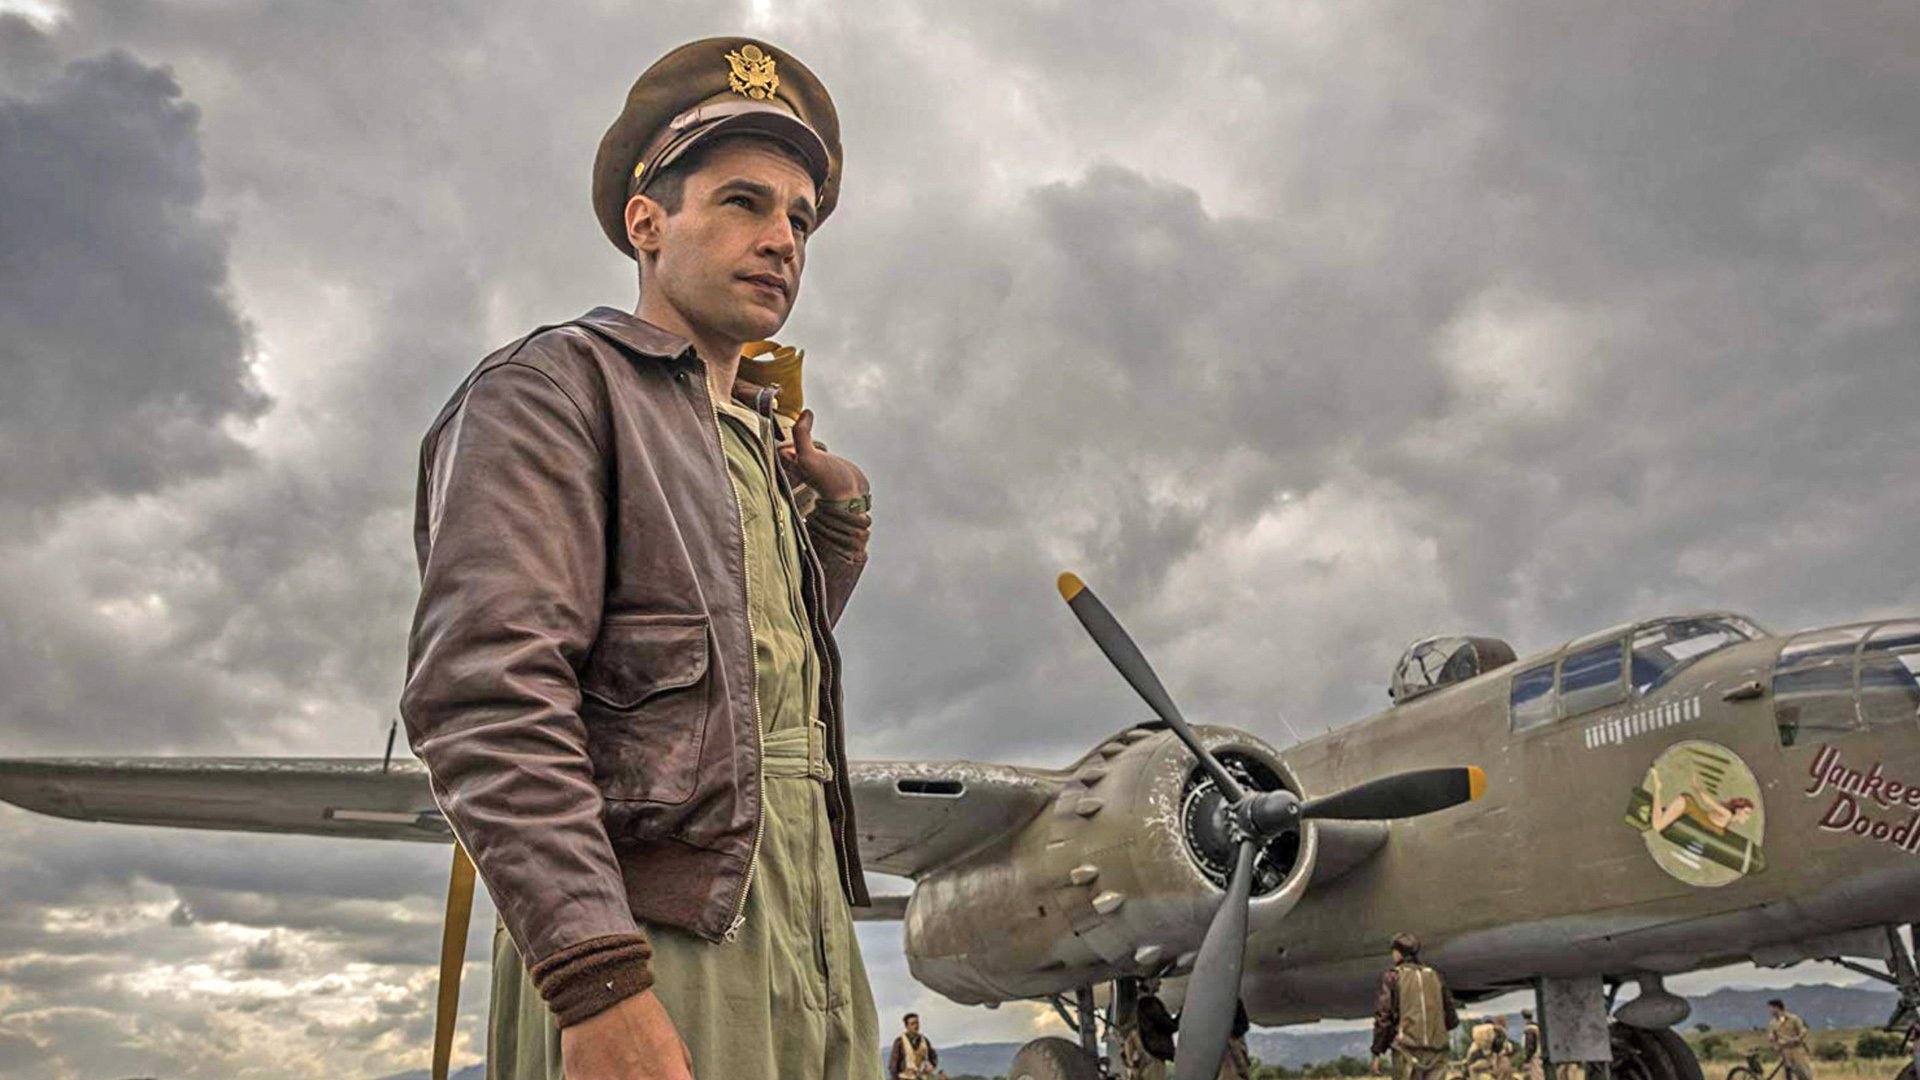 Christopher Abbott as Yossarian in Hulu’s Catch-22 miniseries, 2019. Photo by Pictorial Press Ltd.